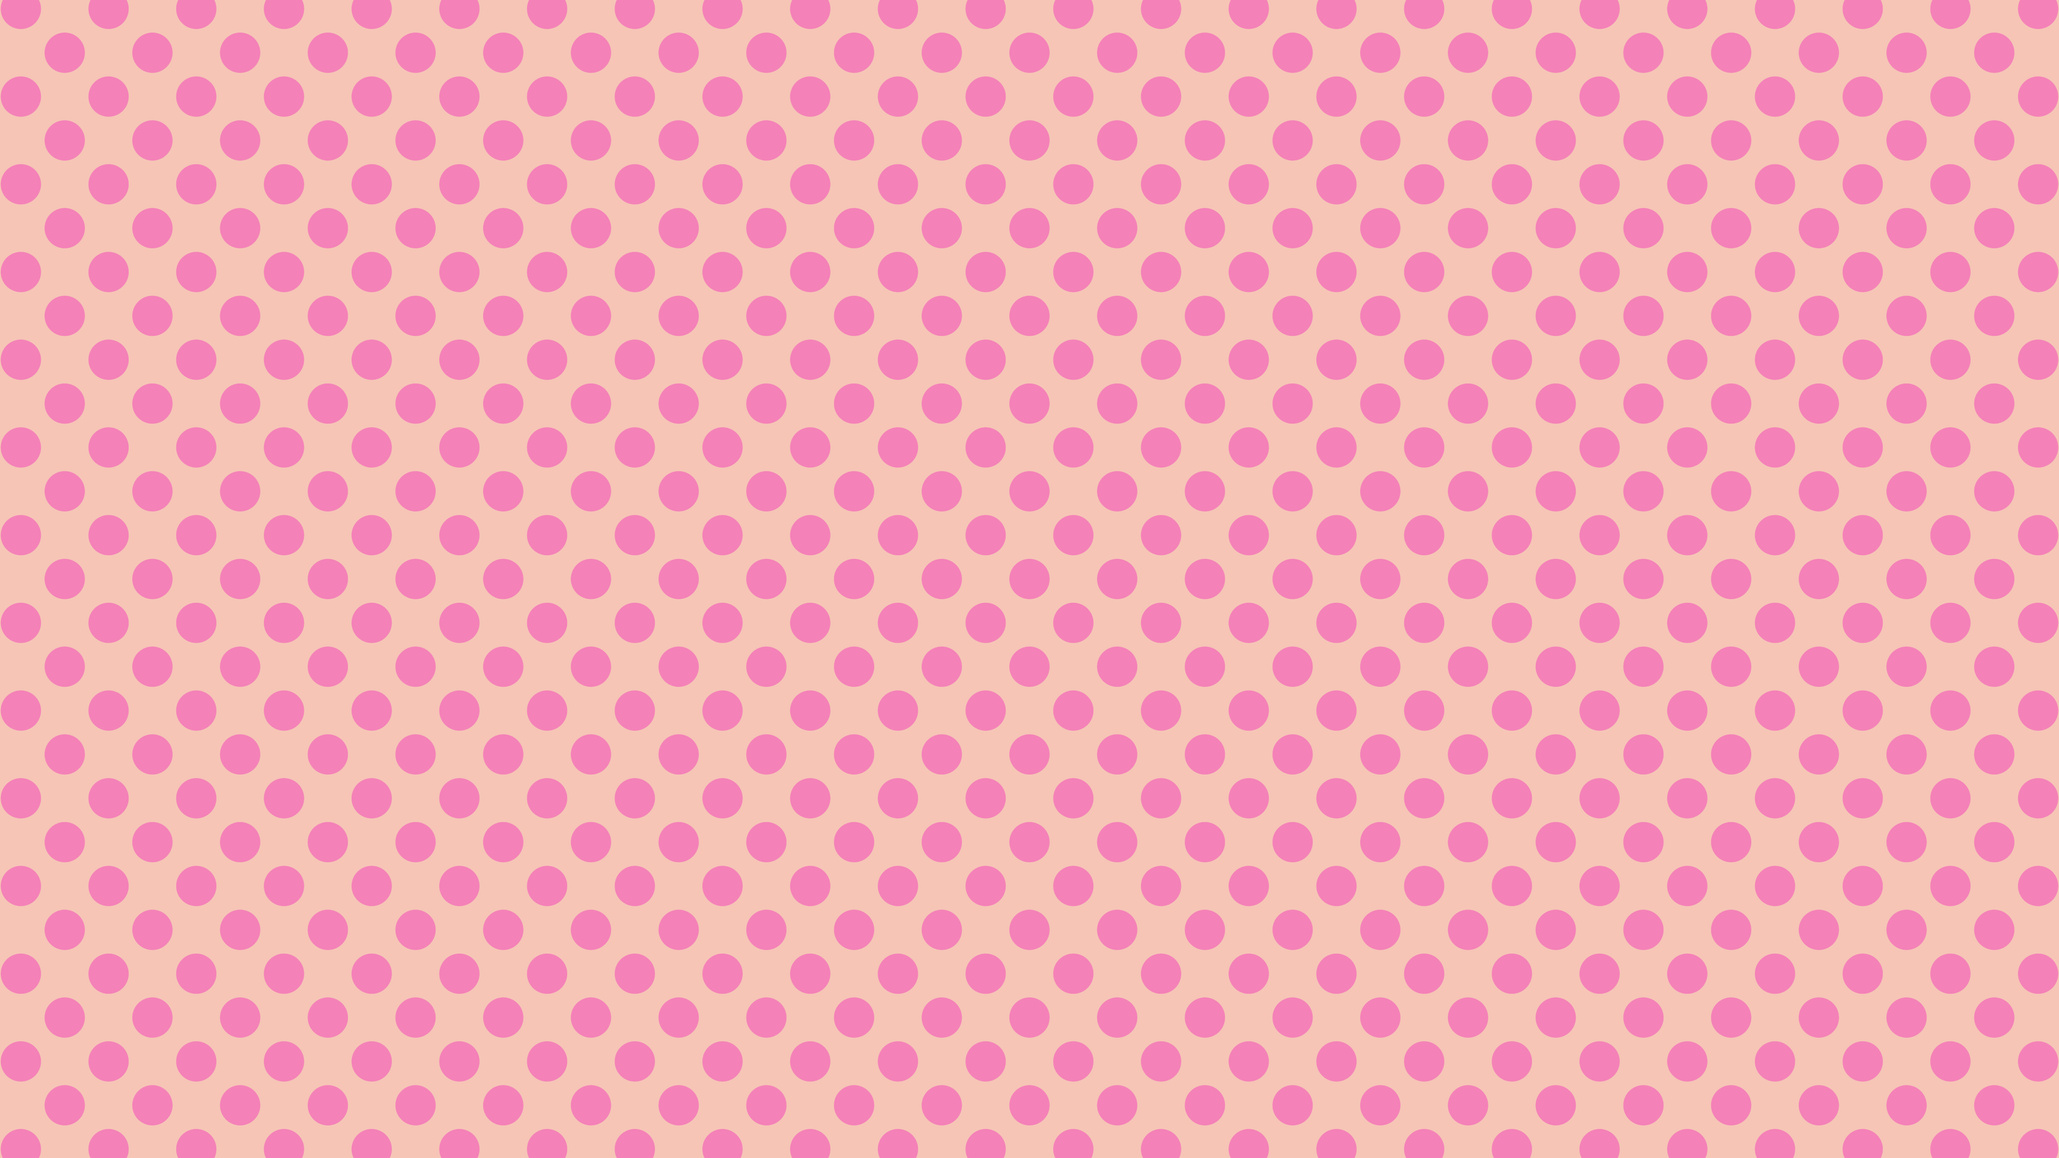 Polka Dots Abstract Pattern Comic Pop-Art Background